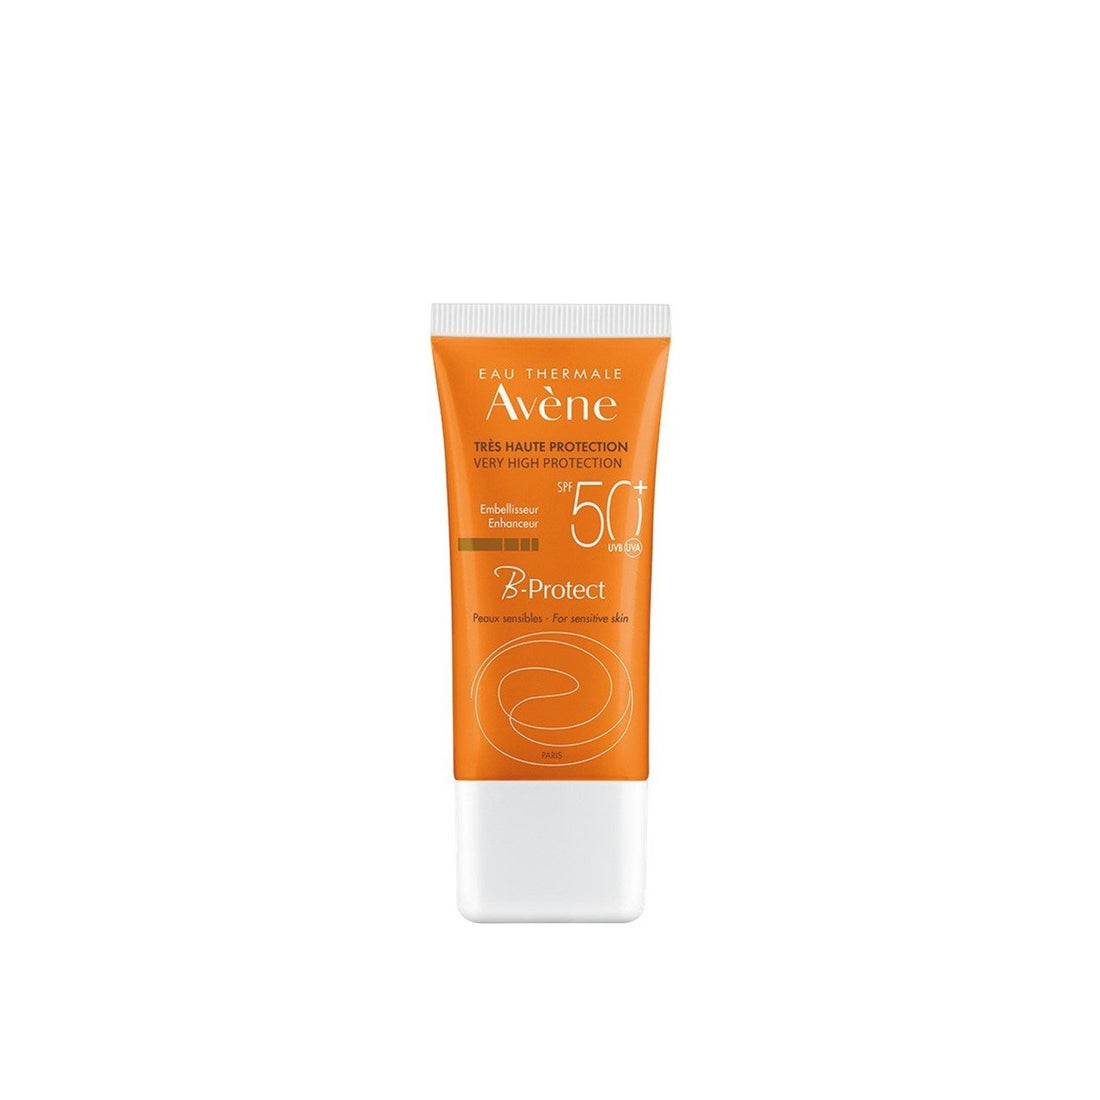 Avène Protection Solaire Bprotect SPF50+ 30 ml